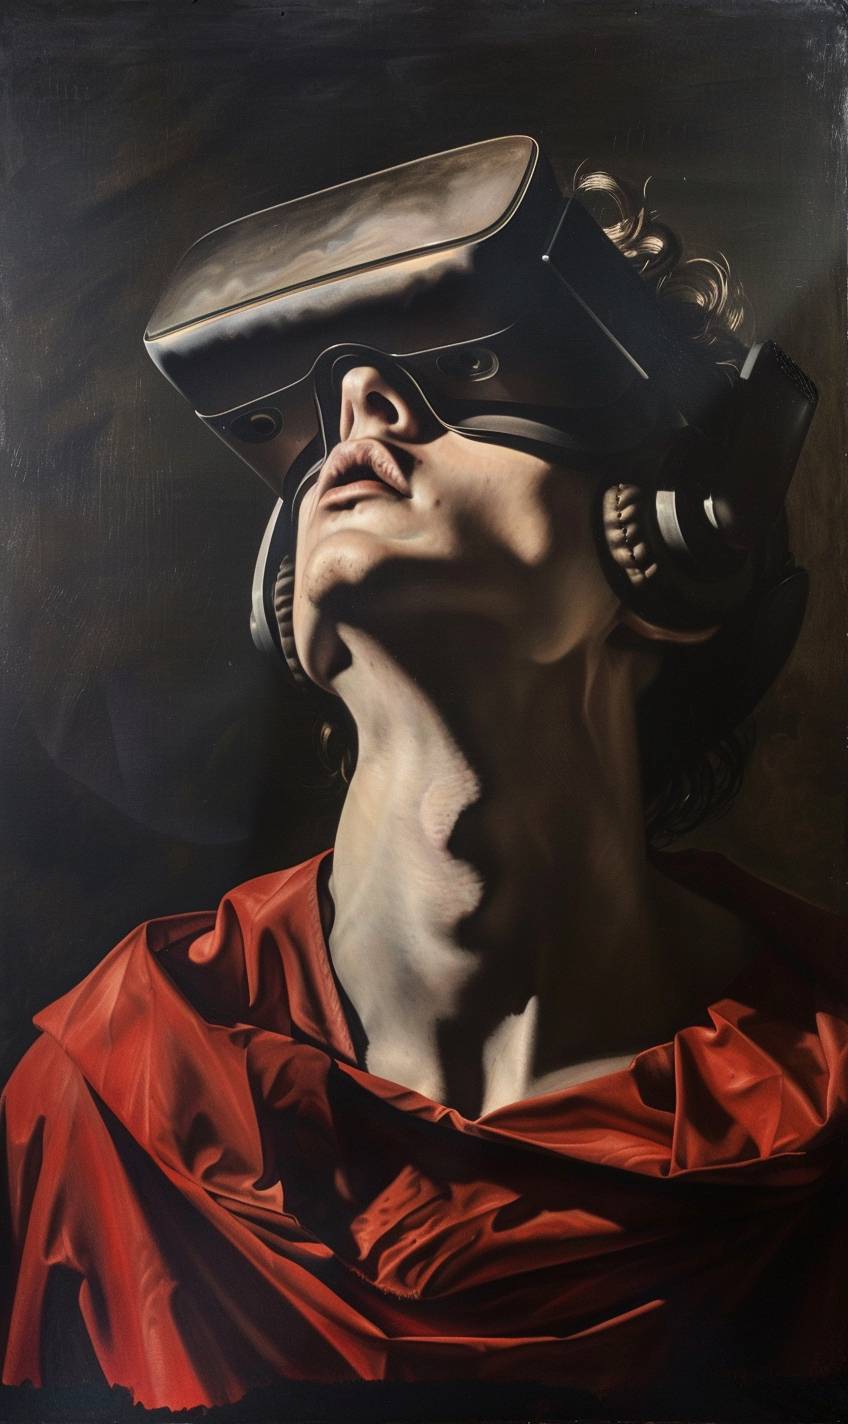 Caravaggio's painting depicting VR headset